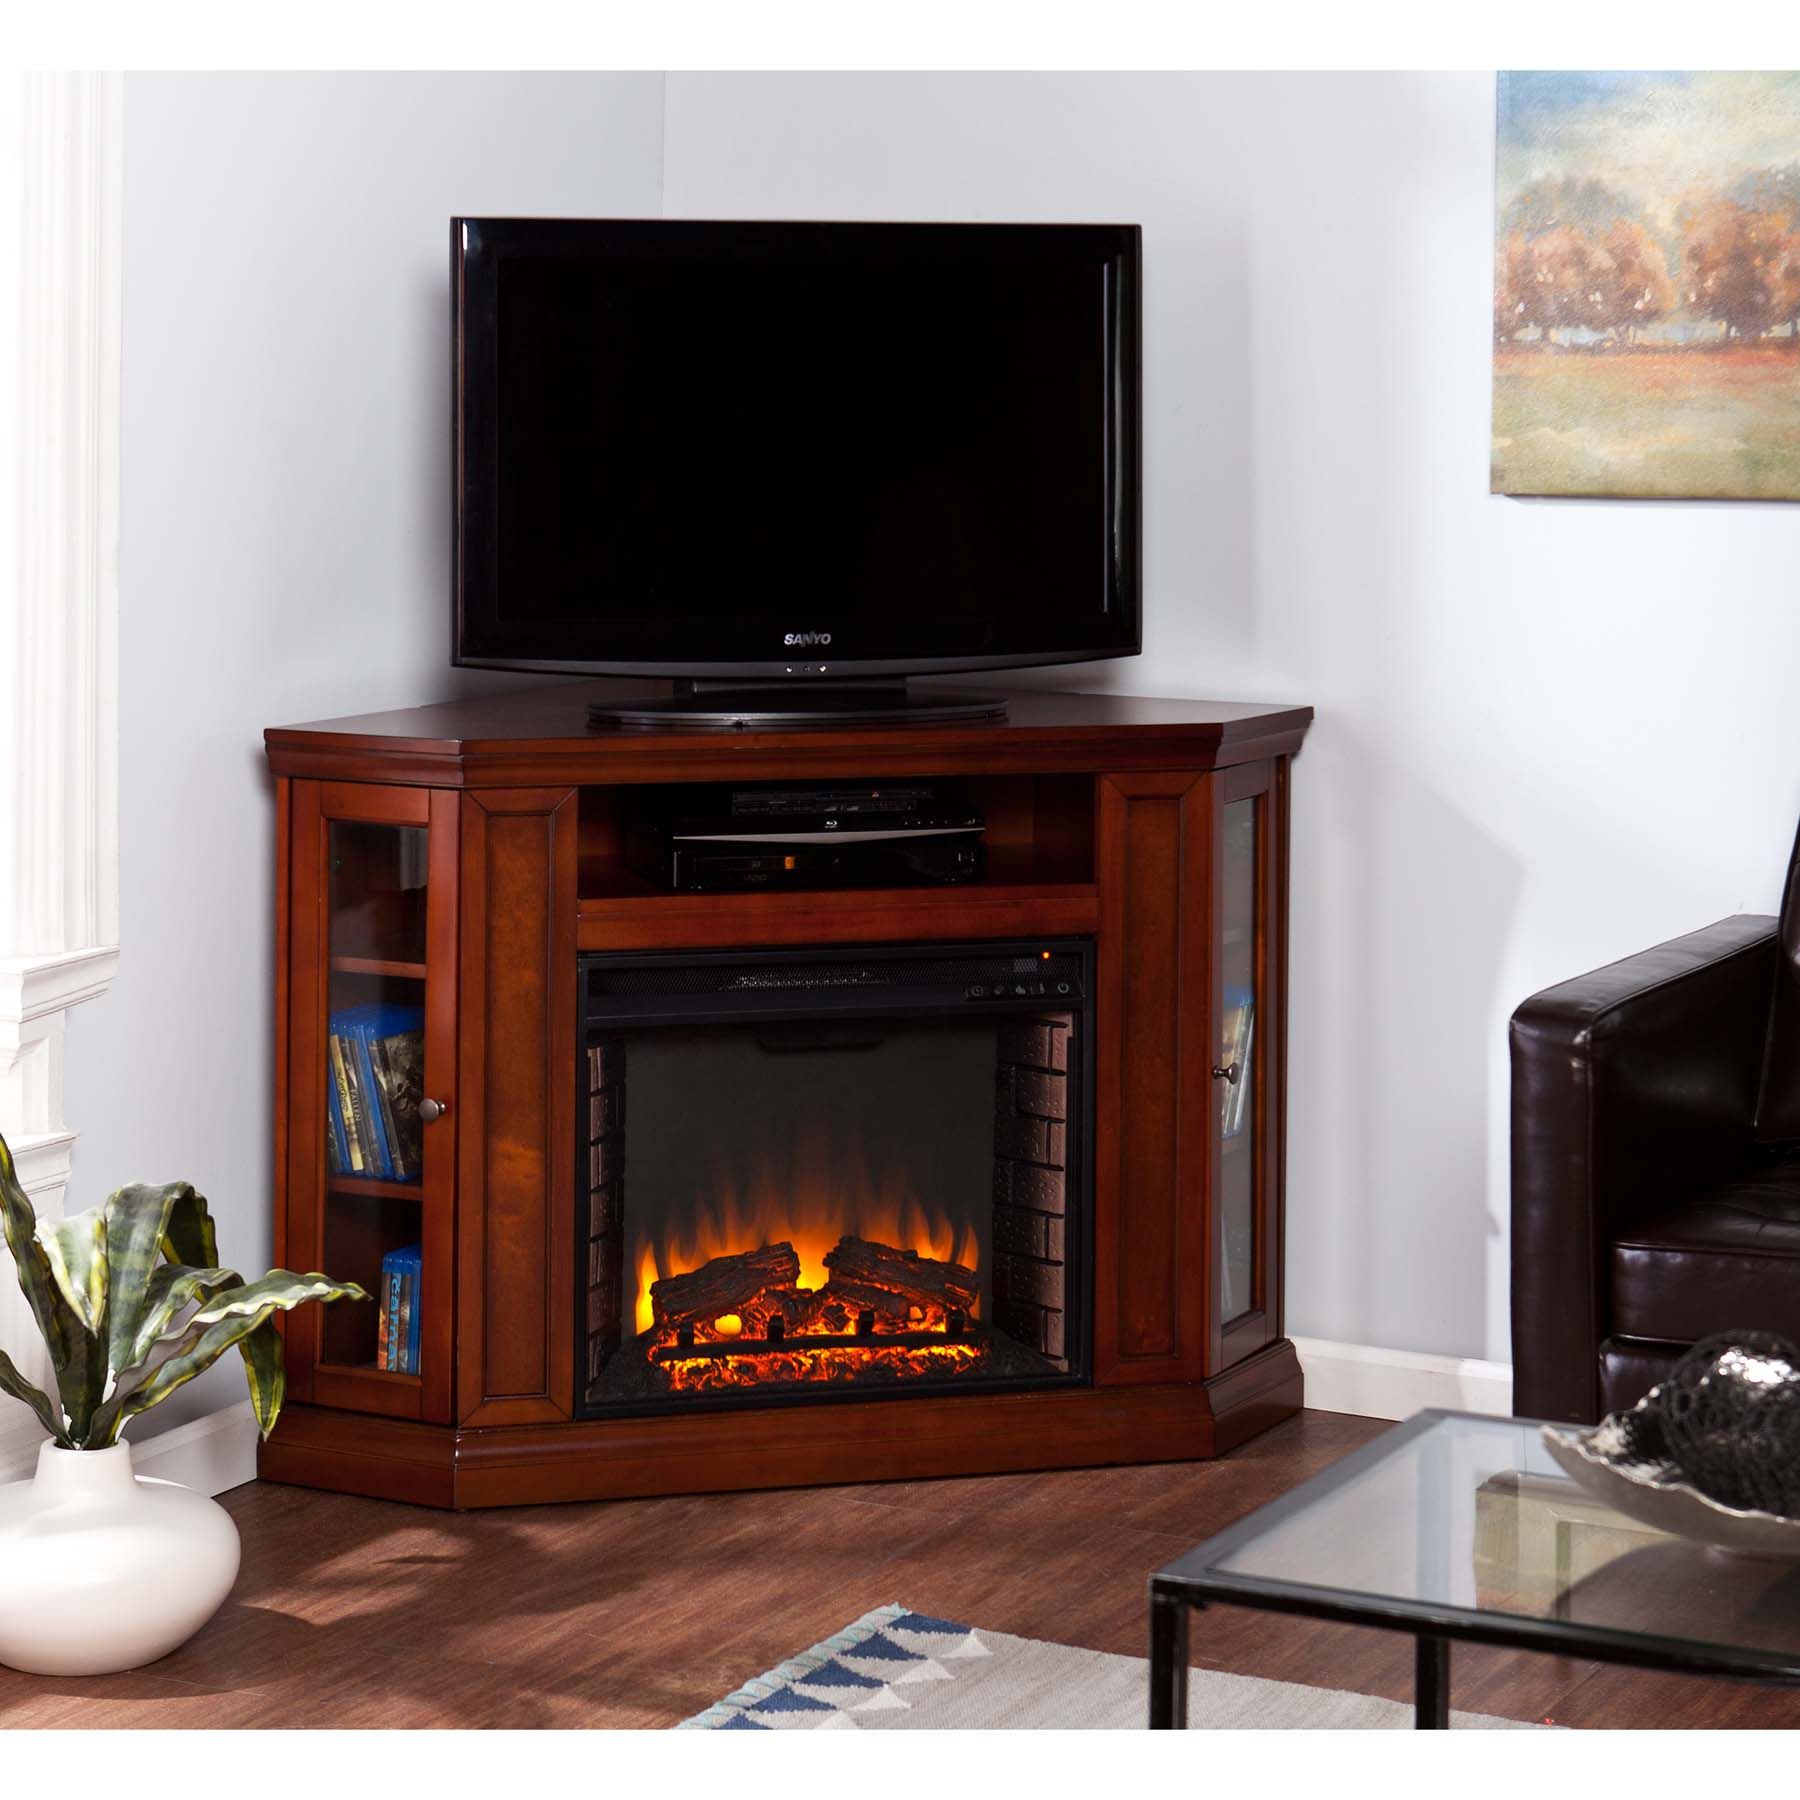 Console Fireplace Costco Lovely 42 Best Rustic Fireplace Images